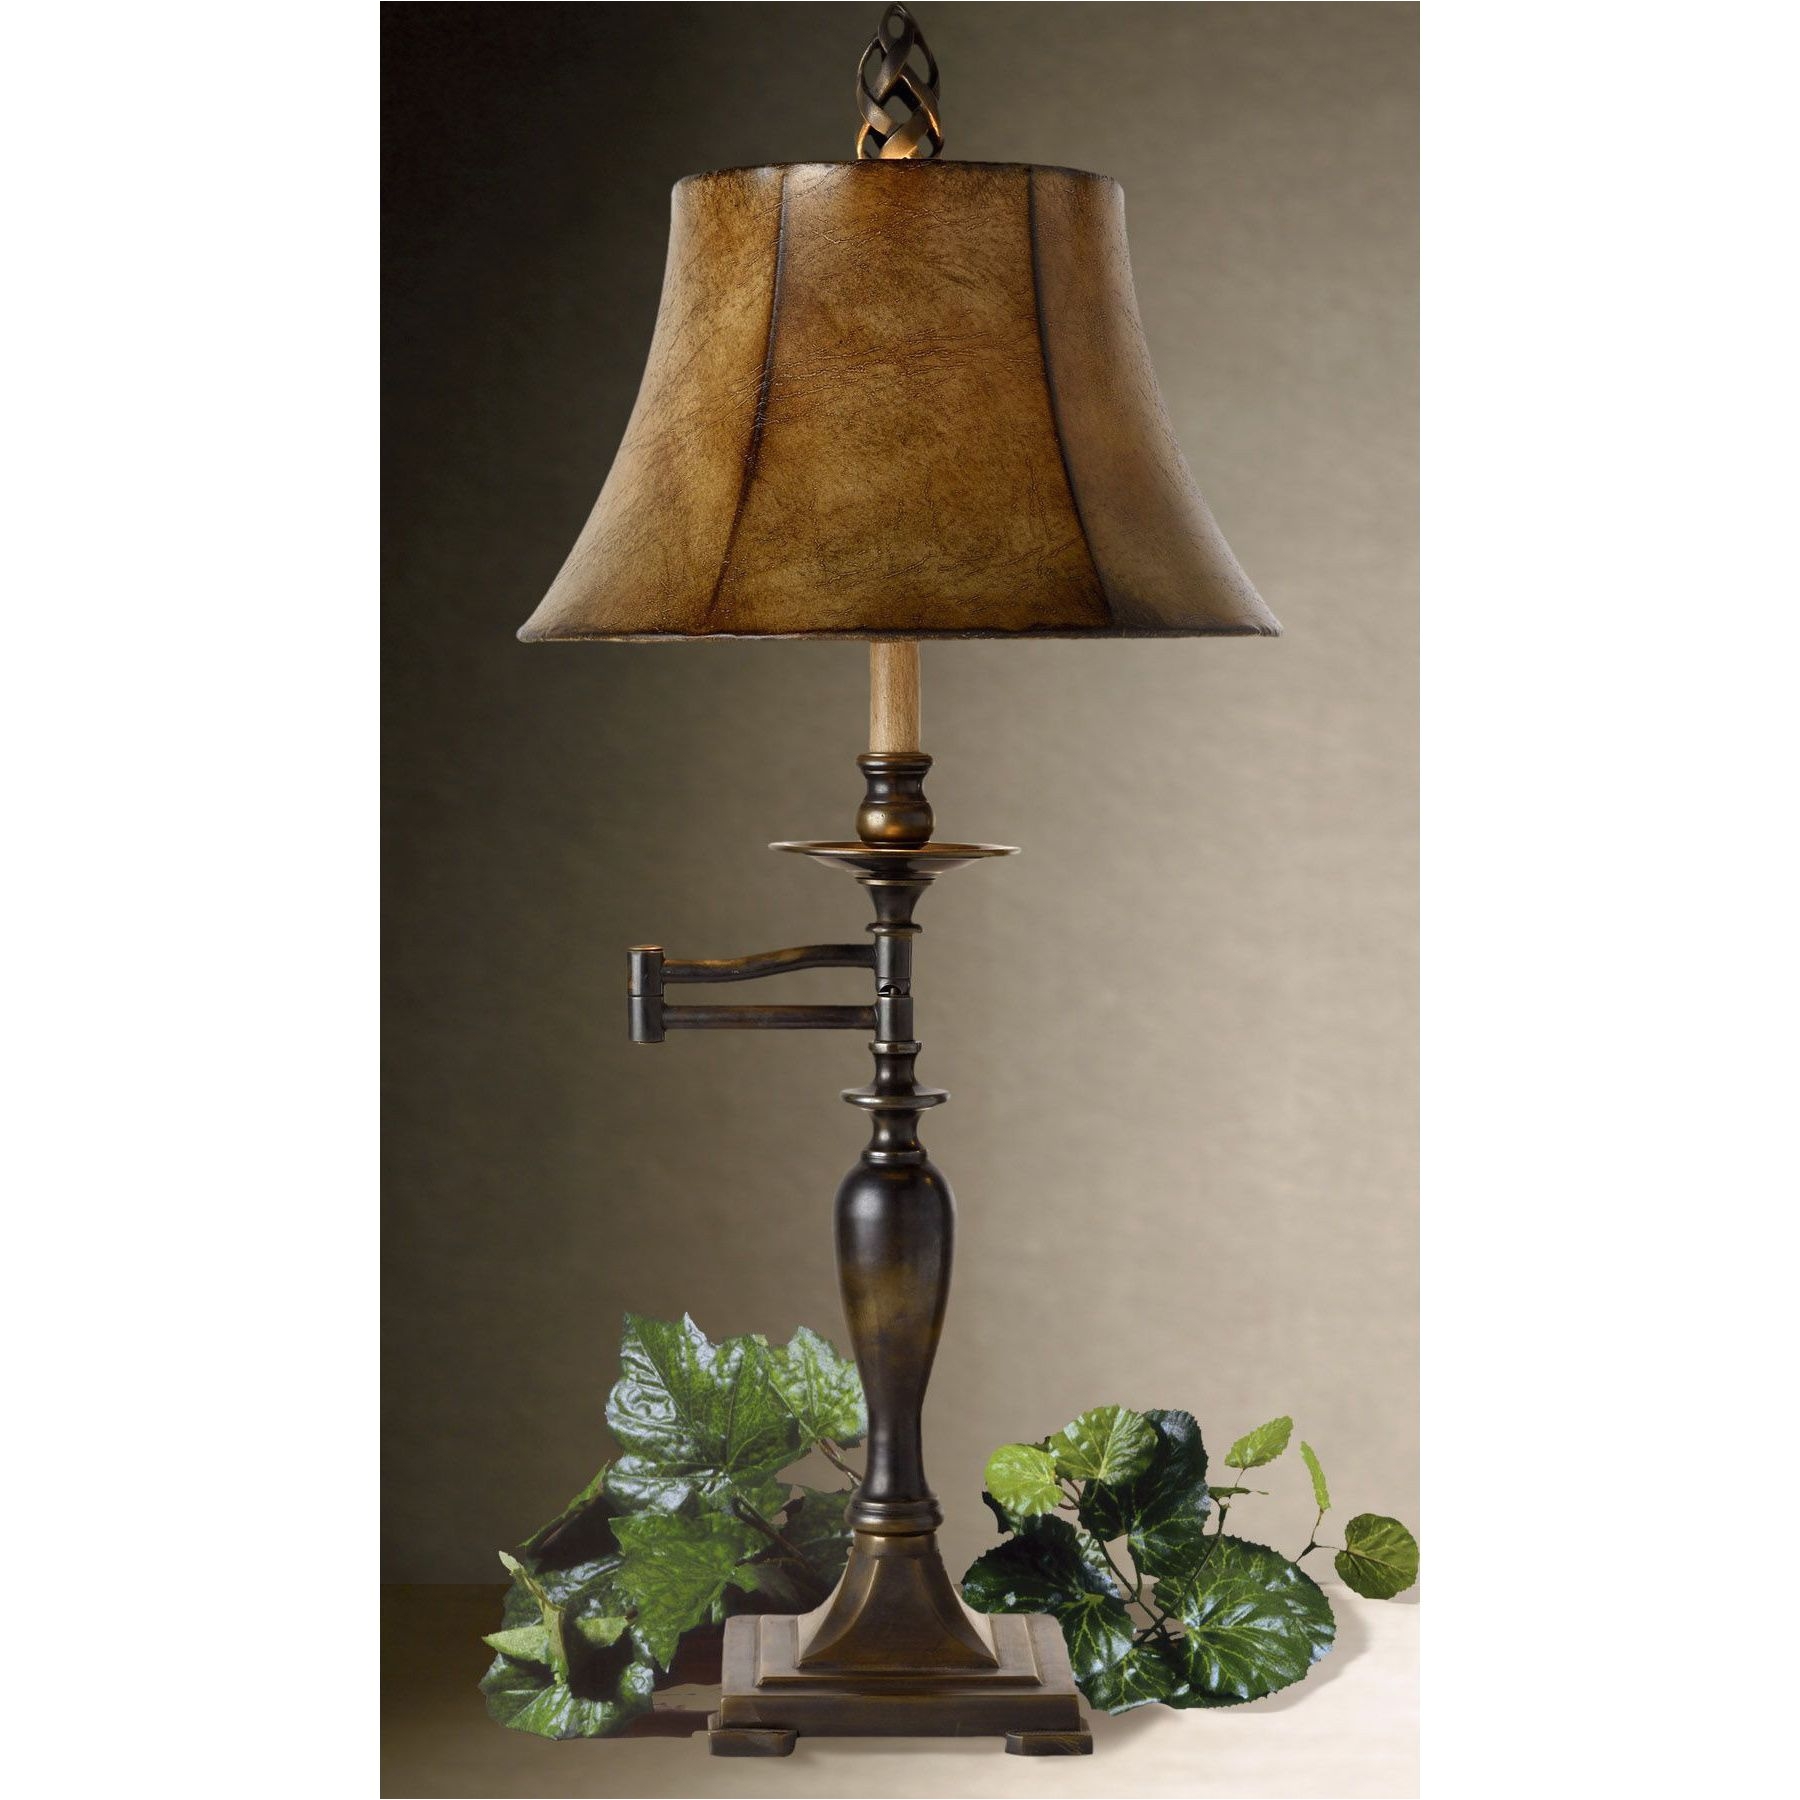 flambeau lighting ta1117 tuscan single light table lamp with rustic jar base and sculpted goddess detail from the derbigny collect